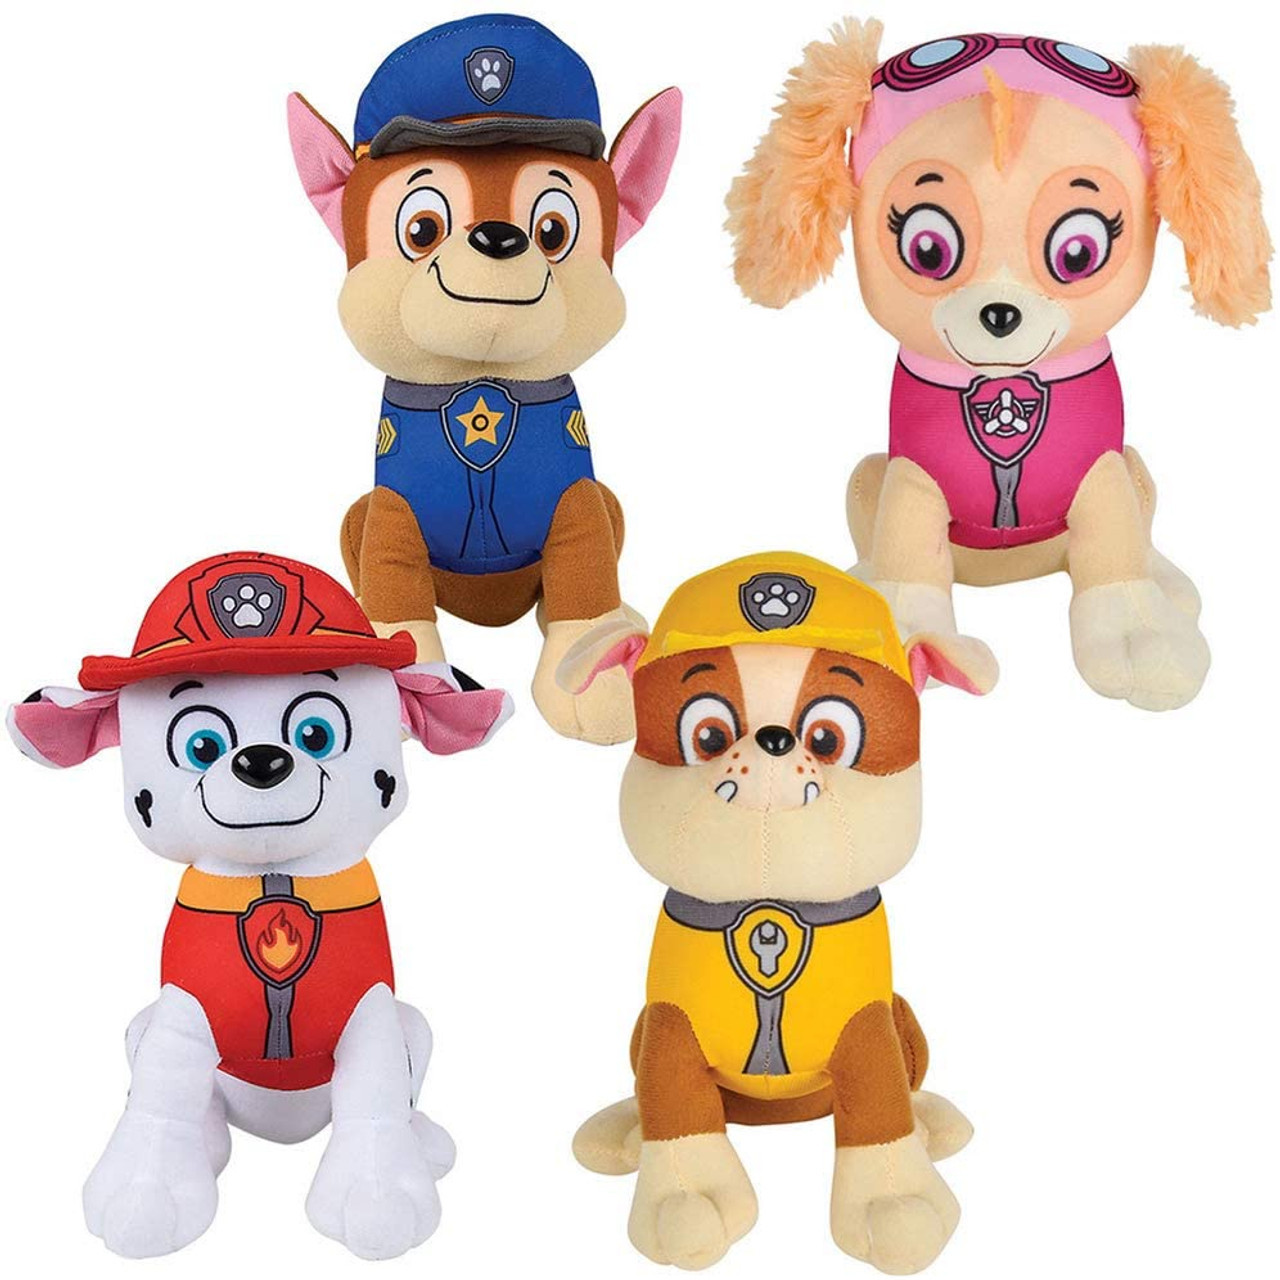 Join the Paw Patrol with Stuffed Toy Heroes